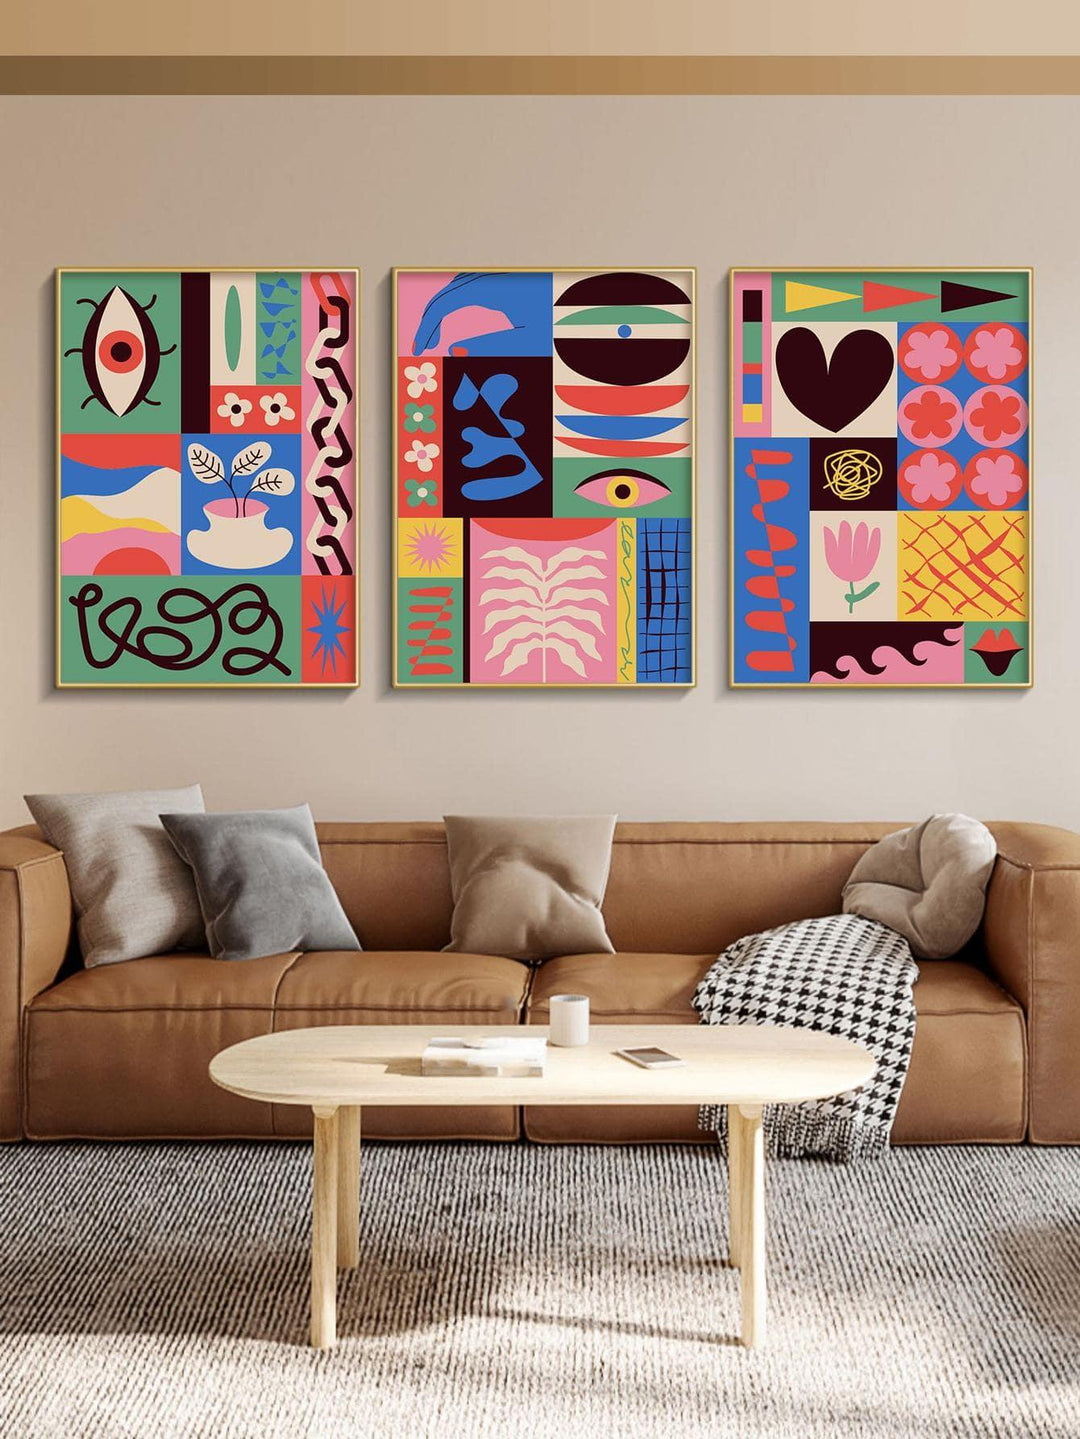 3pcs Abstract Geometric Pattern Unframed Painting Modern Wall Art Canvas Prints For Home Decor - Brand My Case